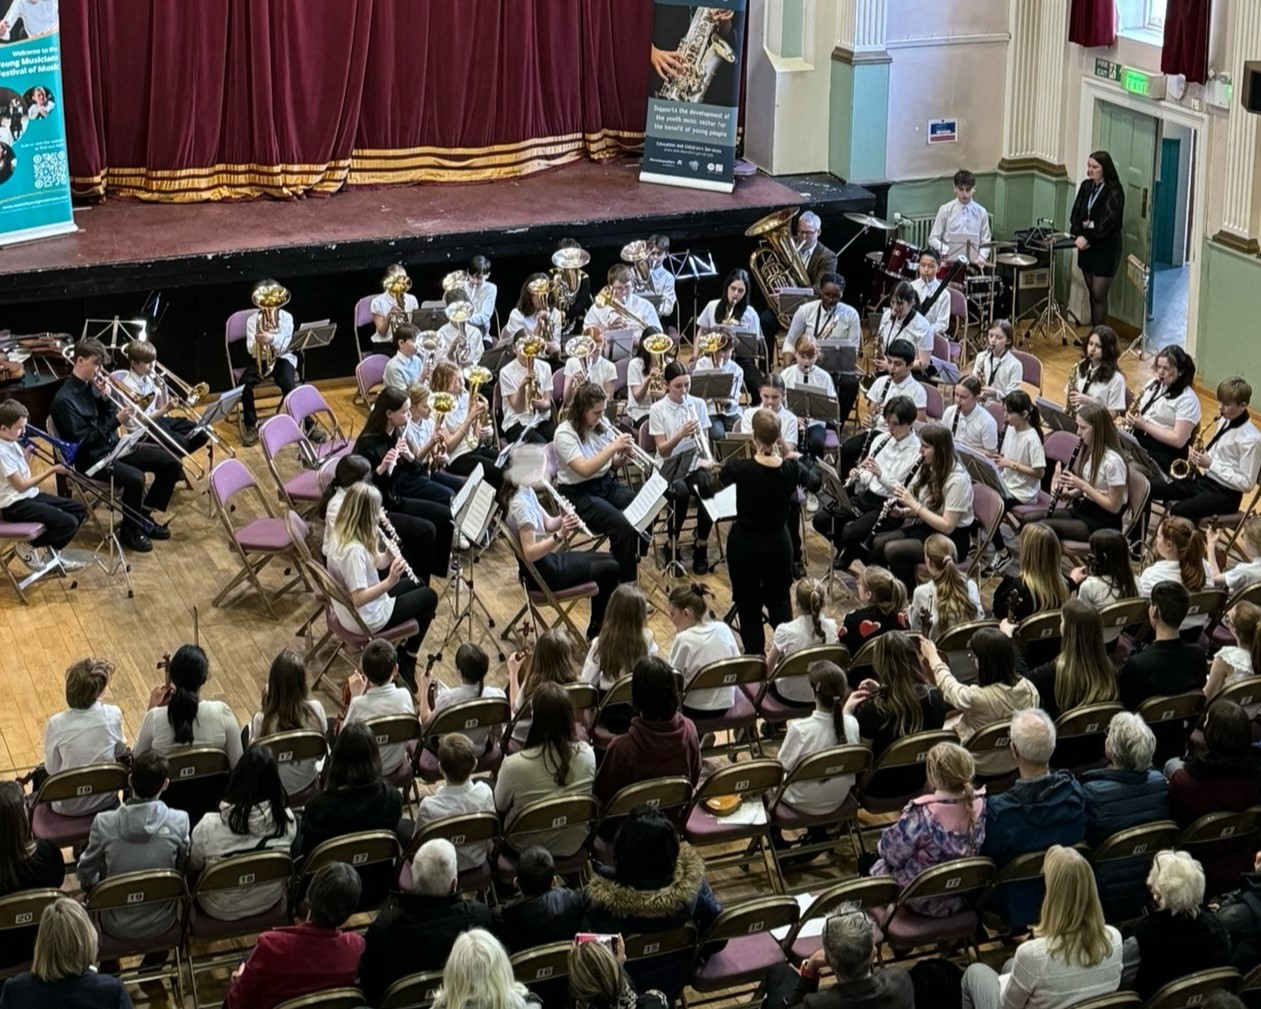 Aberdeenshire Youth Music Sessions (AYMS) presented its end of project concert at Inverurie Town Hall to a full house.